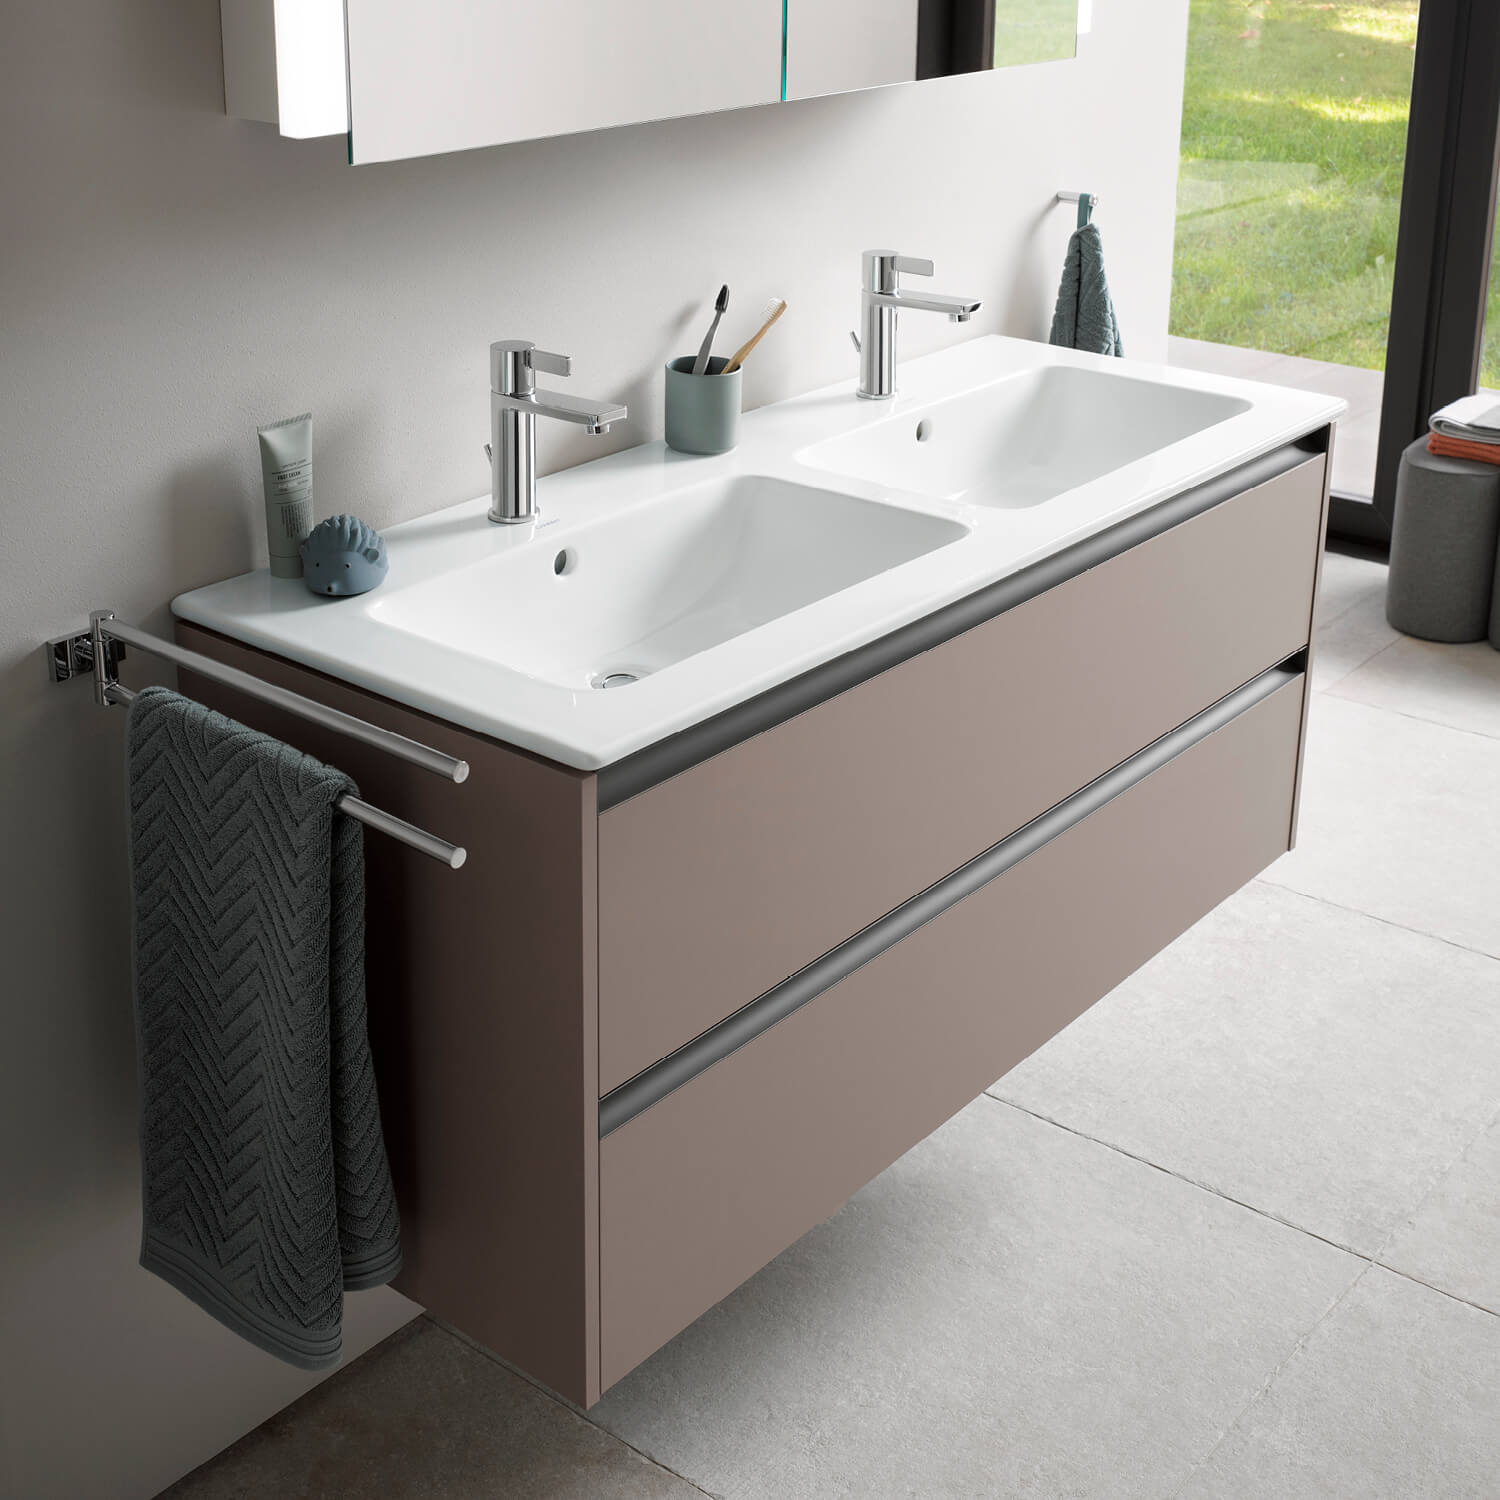 Square Ketho.2 washbasin cabinet infront of a mirrow
